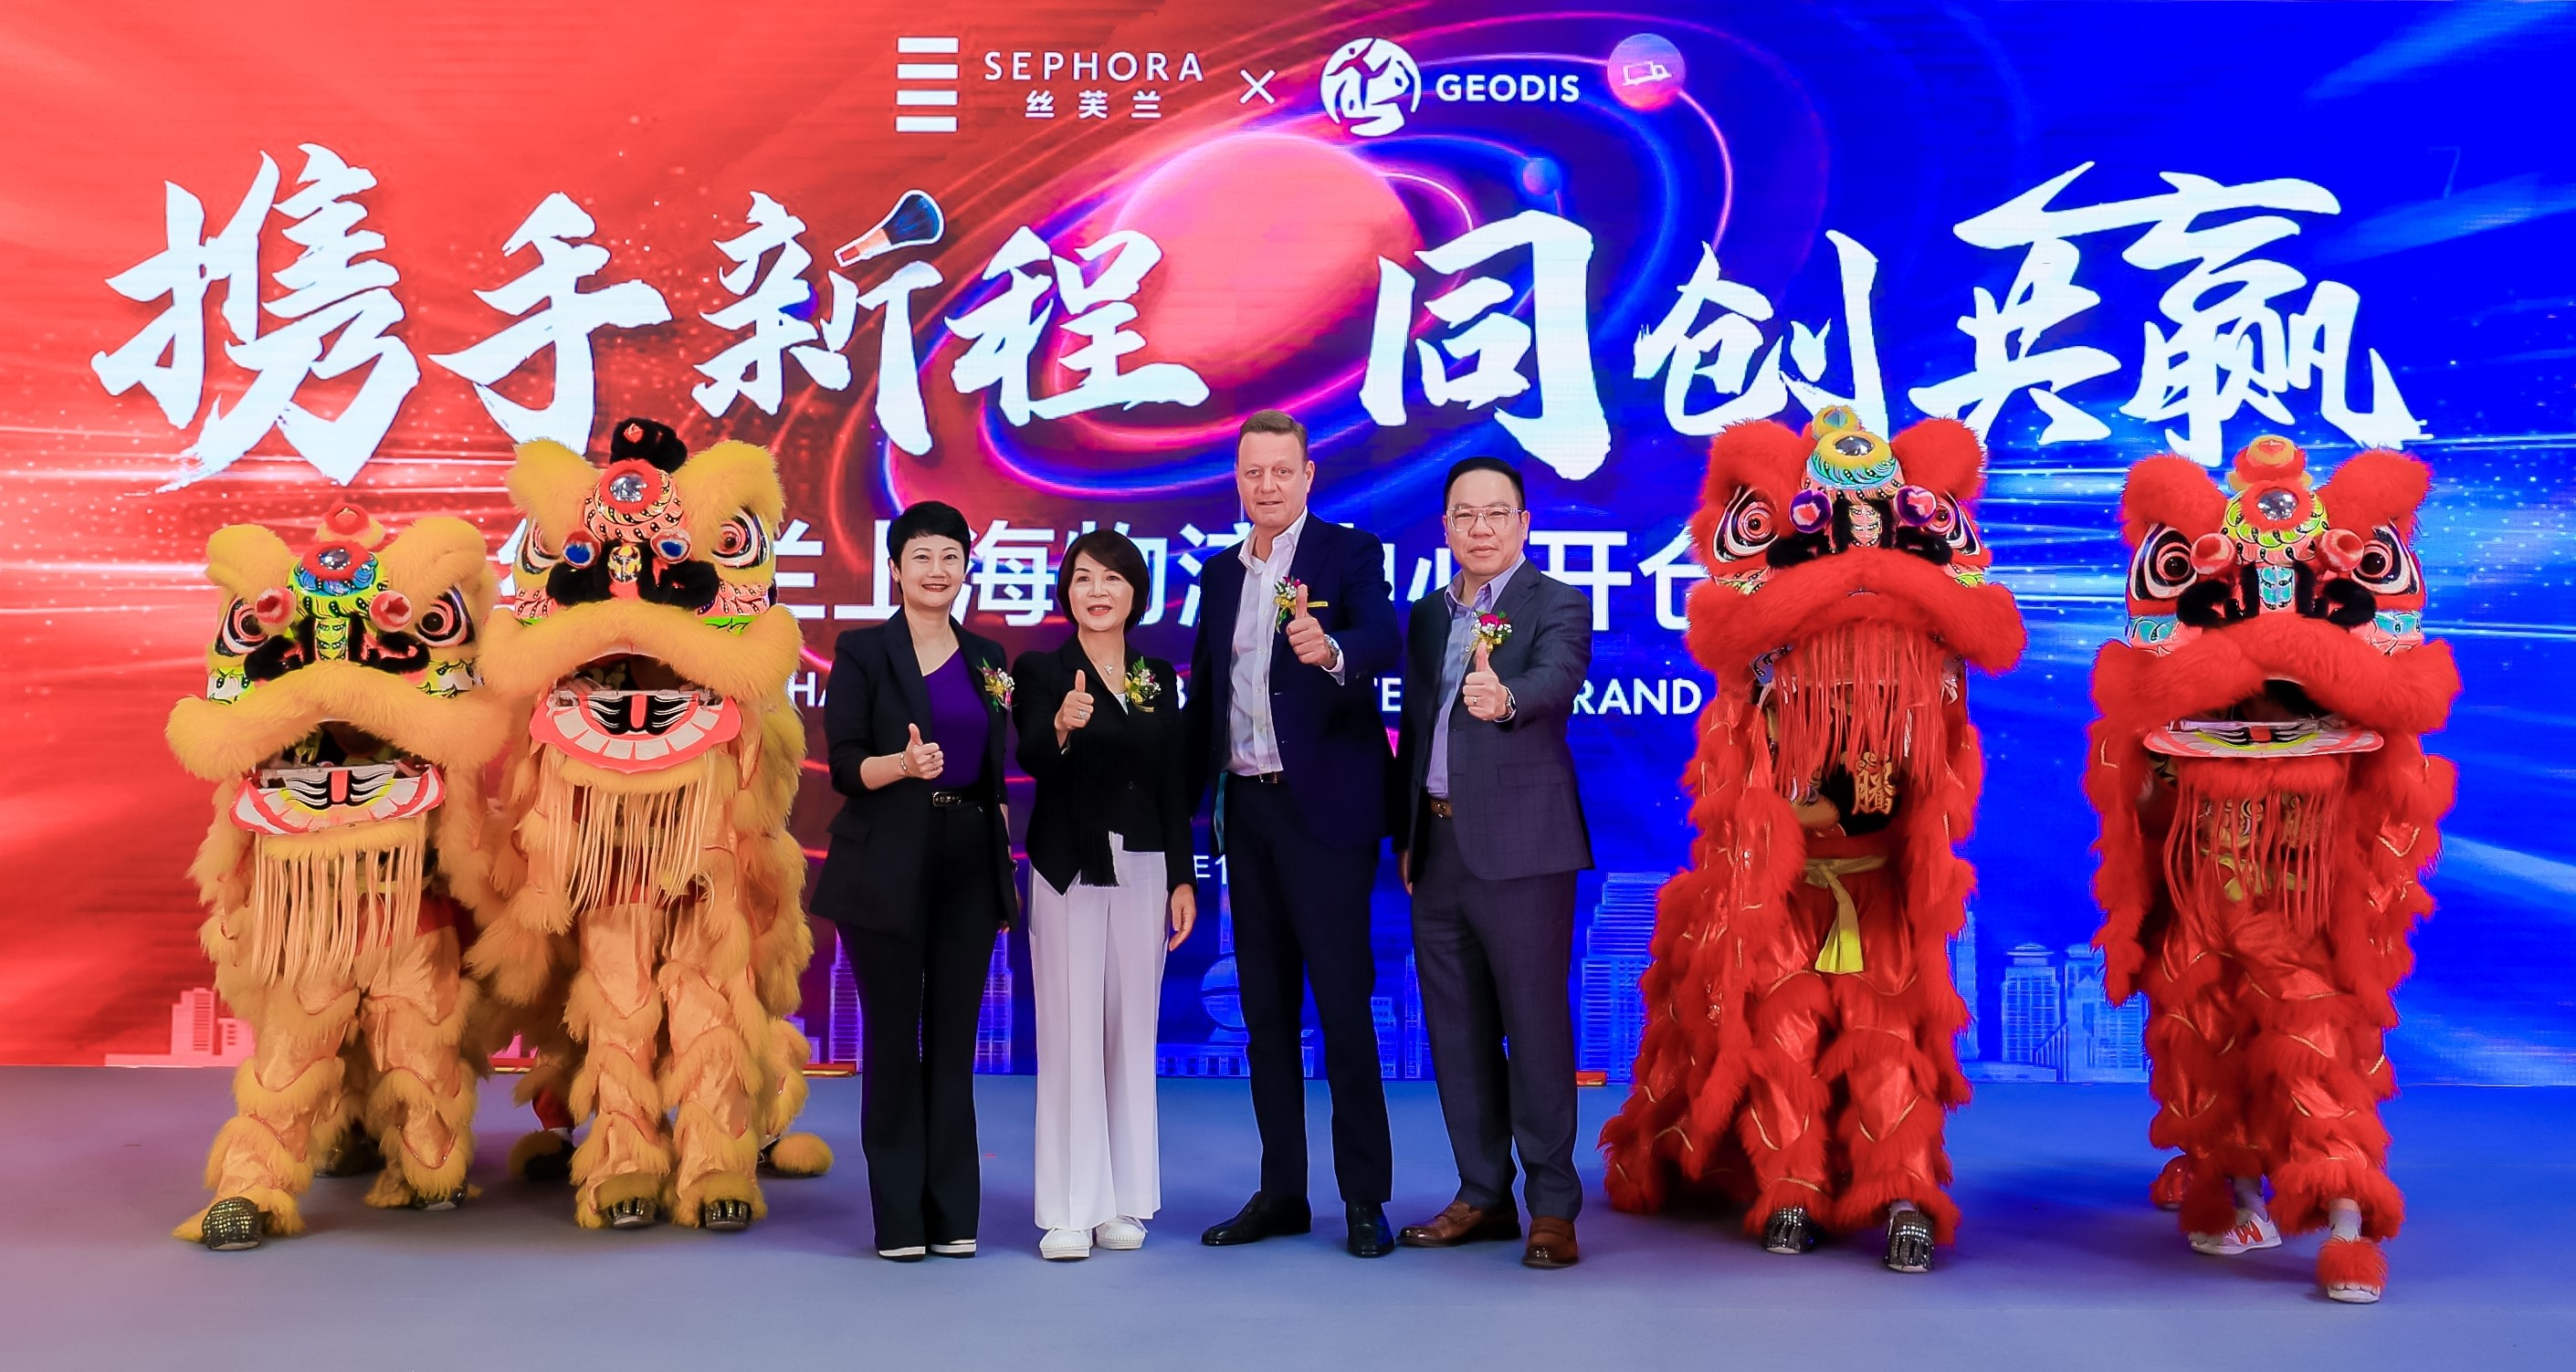 (from left to right) Maggie Chan, Managing Director, Sephora Greater China, Lily Zhou, Chief Operating Officer, Sephora Greater China, Onno Boots, GEODIS APAC and Middle East Regional President and CEO, and Ivan Siew, GEODIS China Managing Director, at the opening ceremony of the new Shanghai distribution centre.